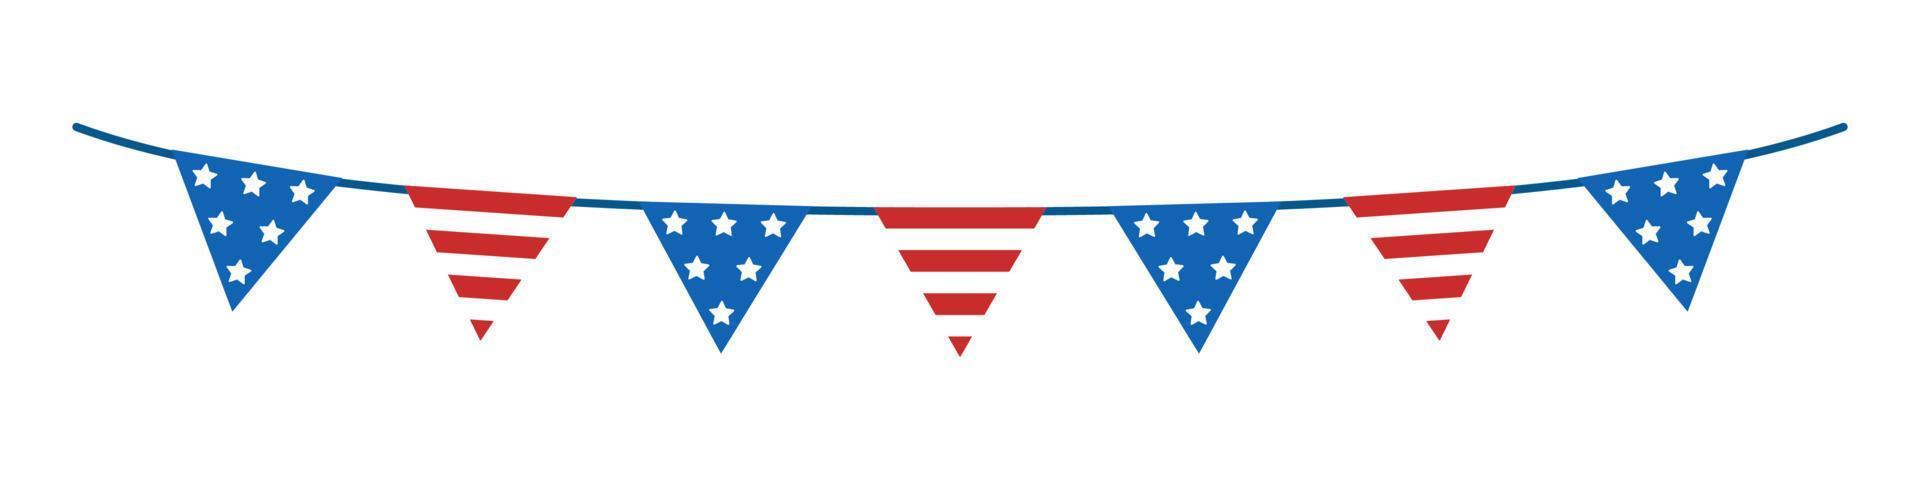 Vector USA garland of flags. Independence day bunting clipart. Triangles. Flag with stars and striped flag.